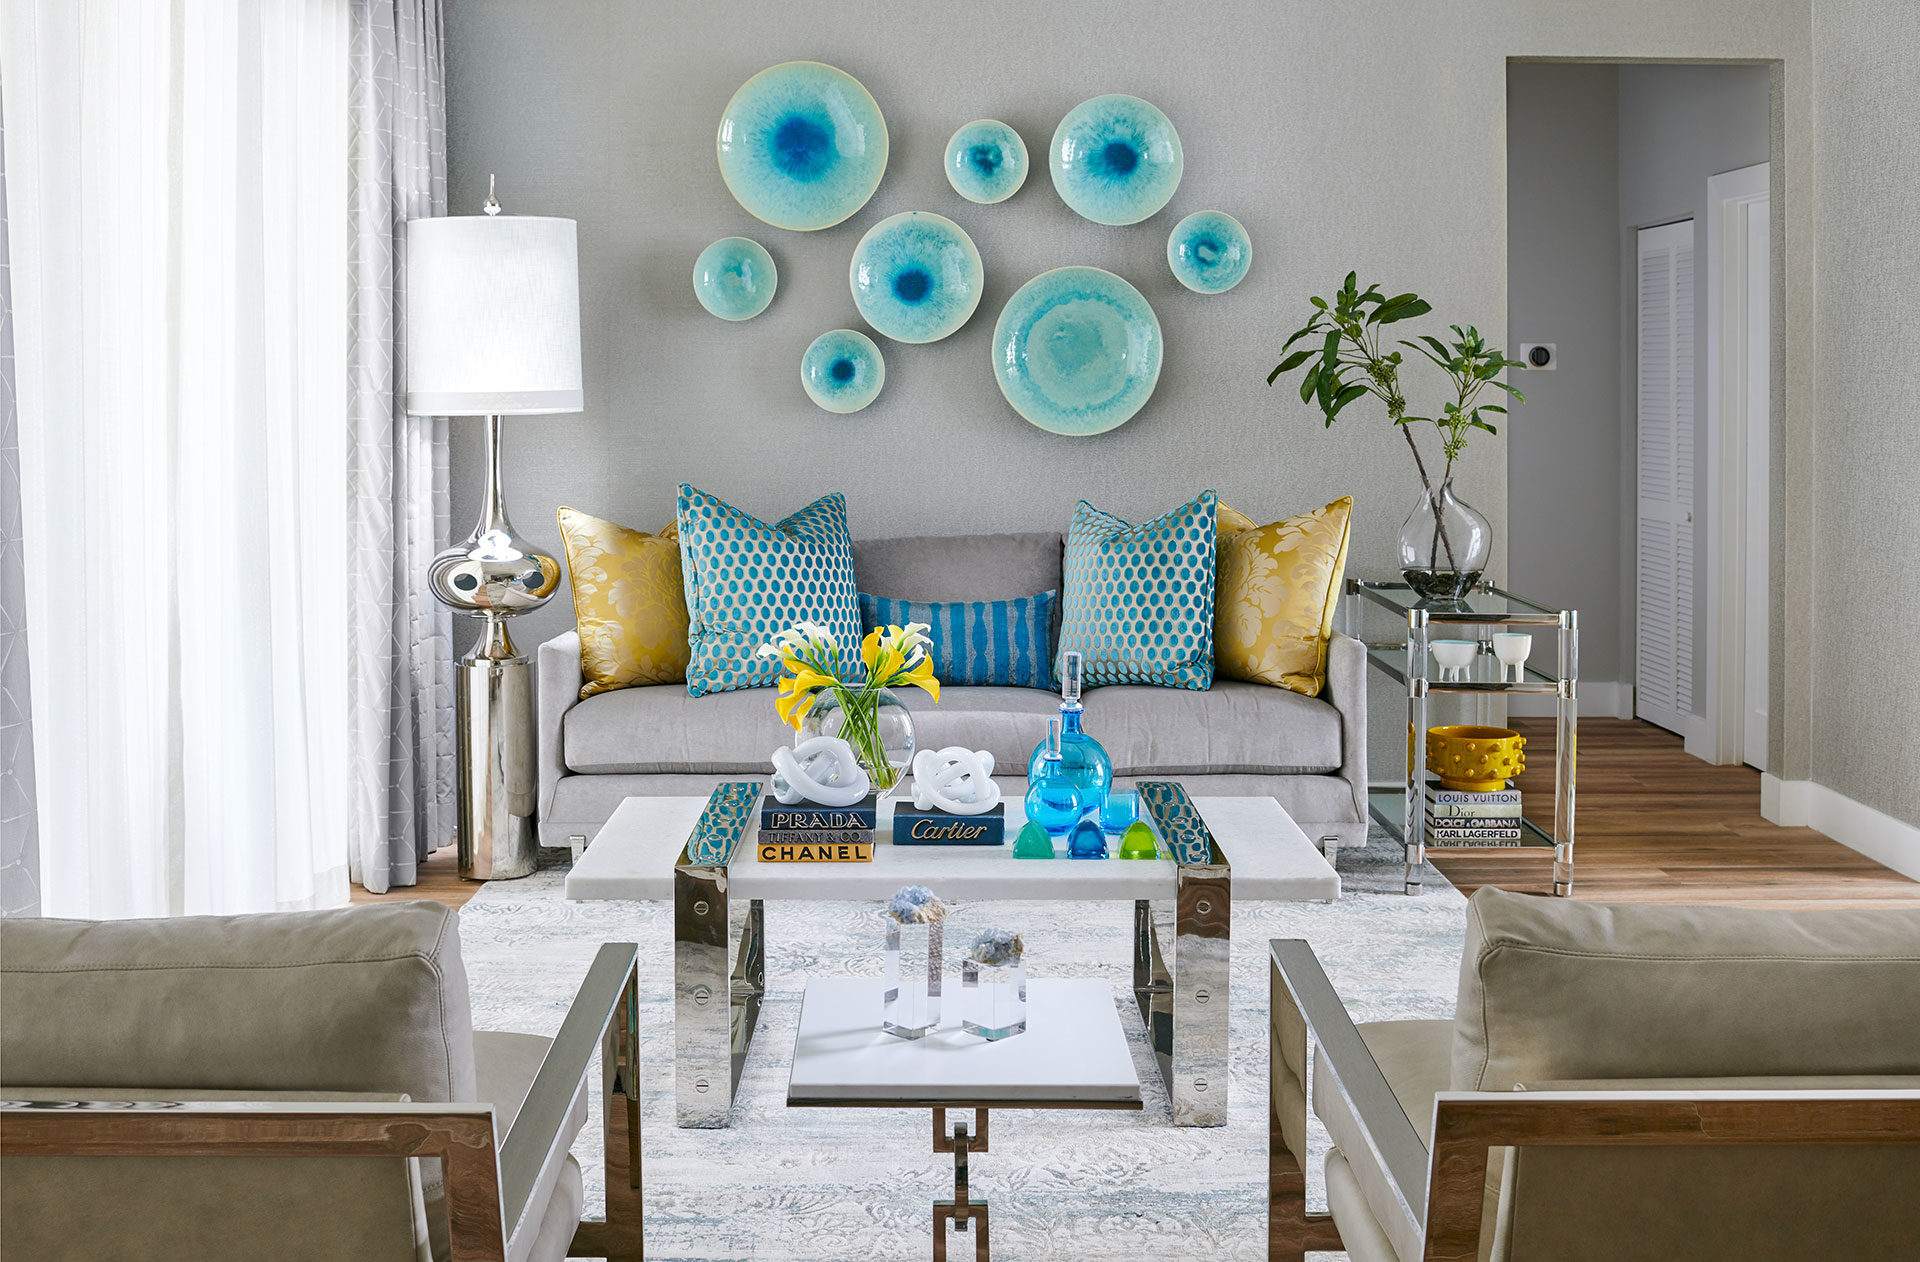 How To Brighten Your Space With Bold Patterns and Colors